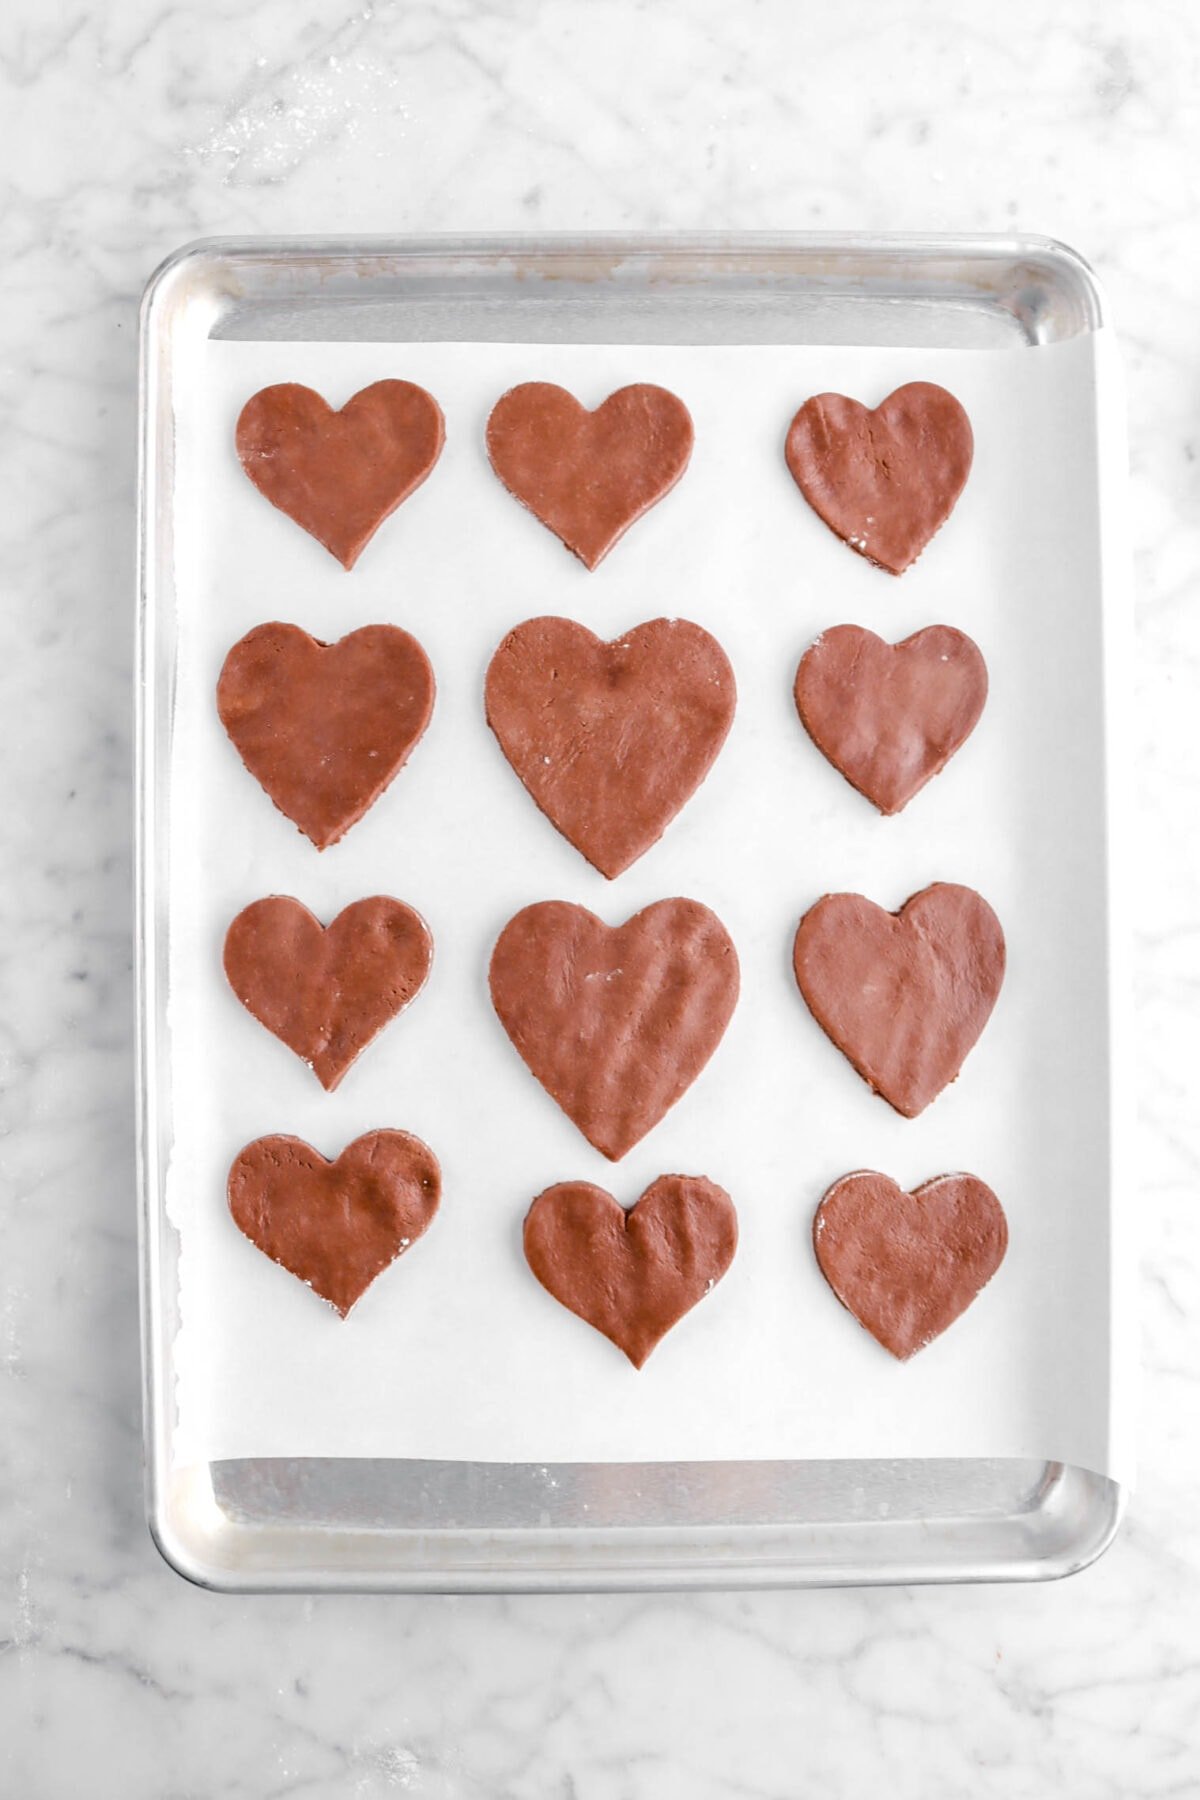 heart shaped chocolate cookie dough on lined baking sheet